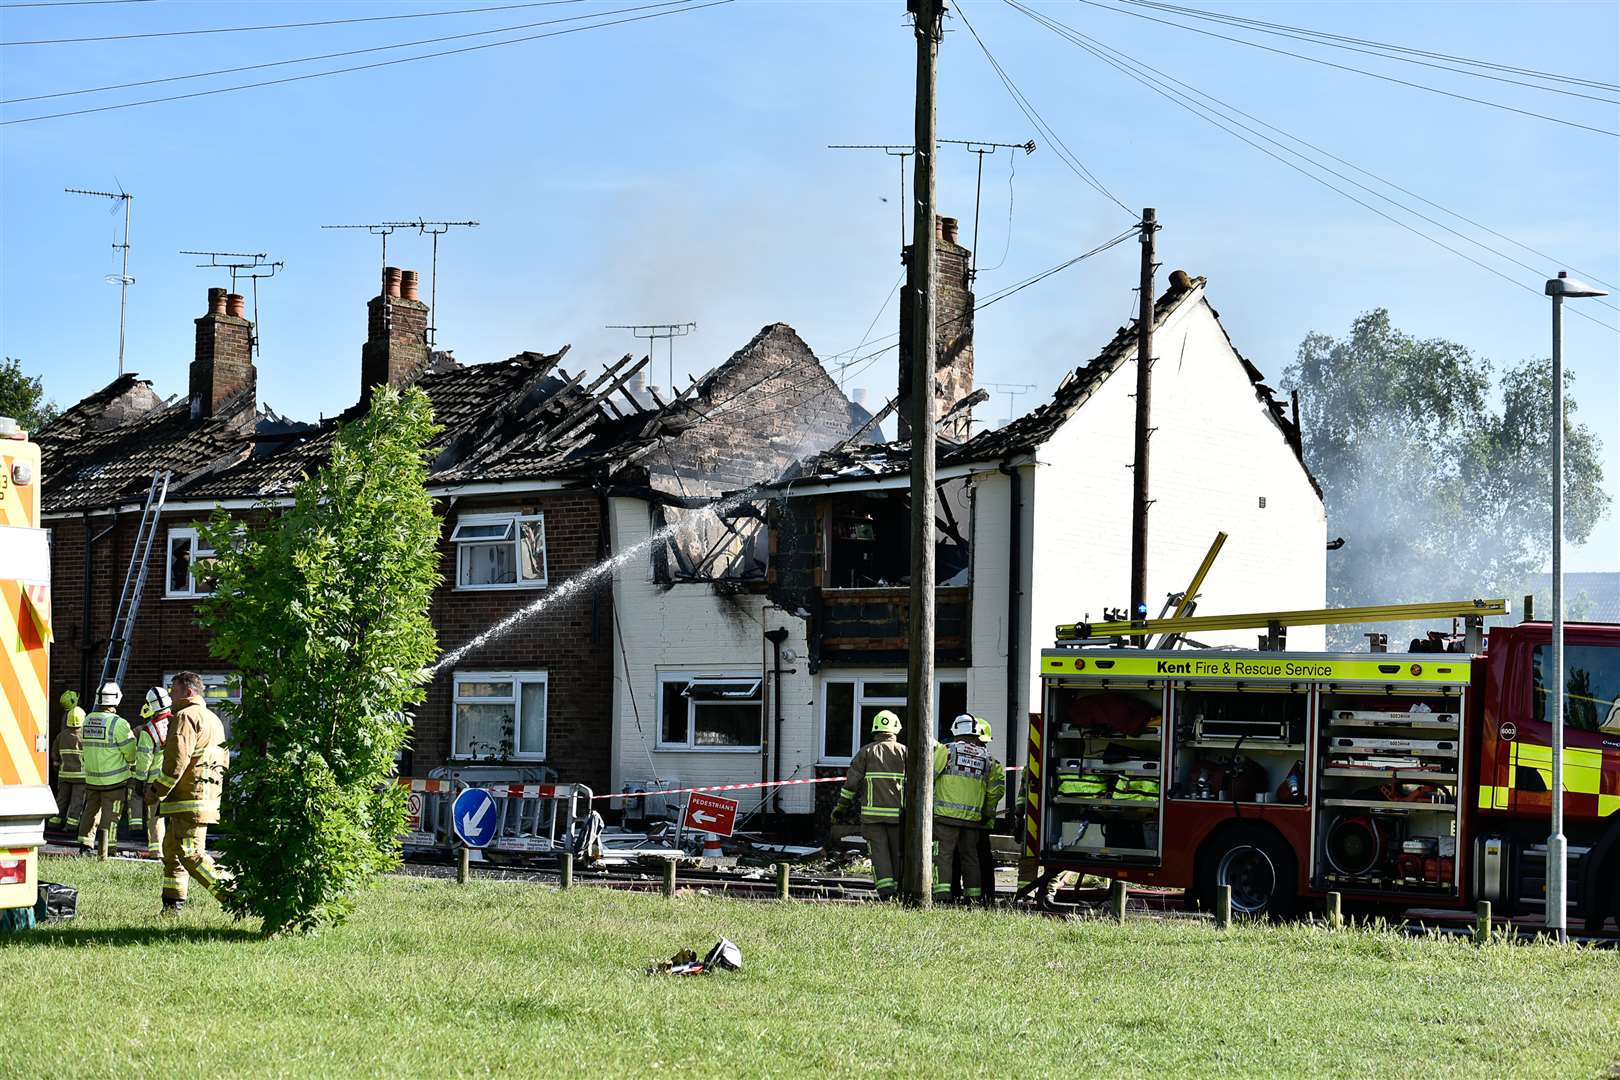 The scene of devastation following the gas explosion and fire at Little Knoll, South Ashford